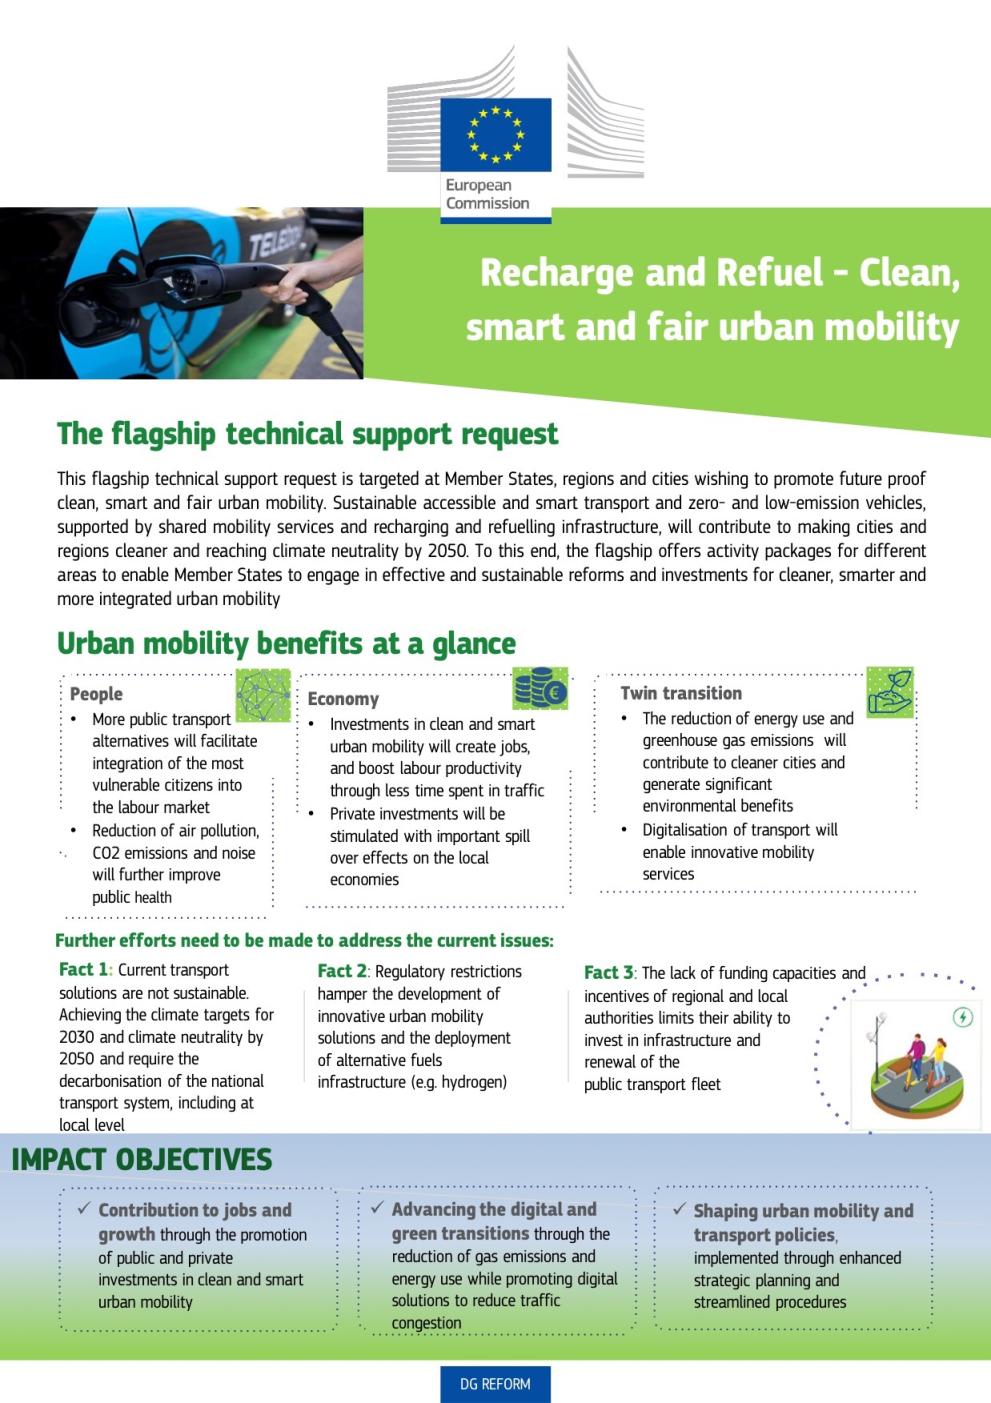 Recharge and Refuel - Clean, smart and fair urban mobility